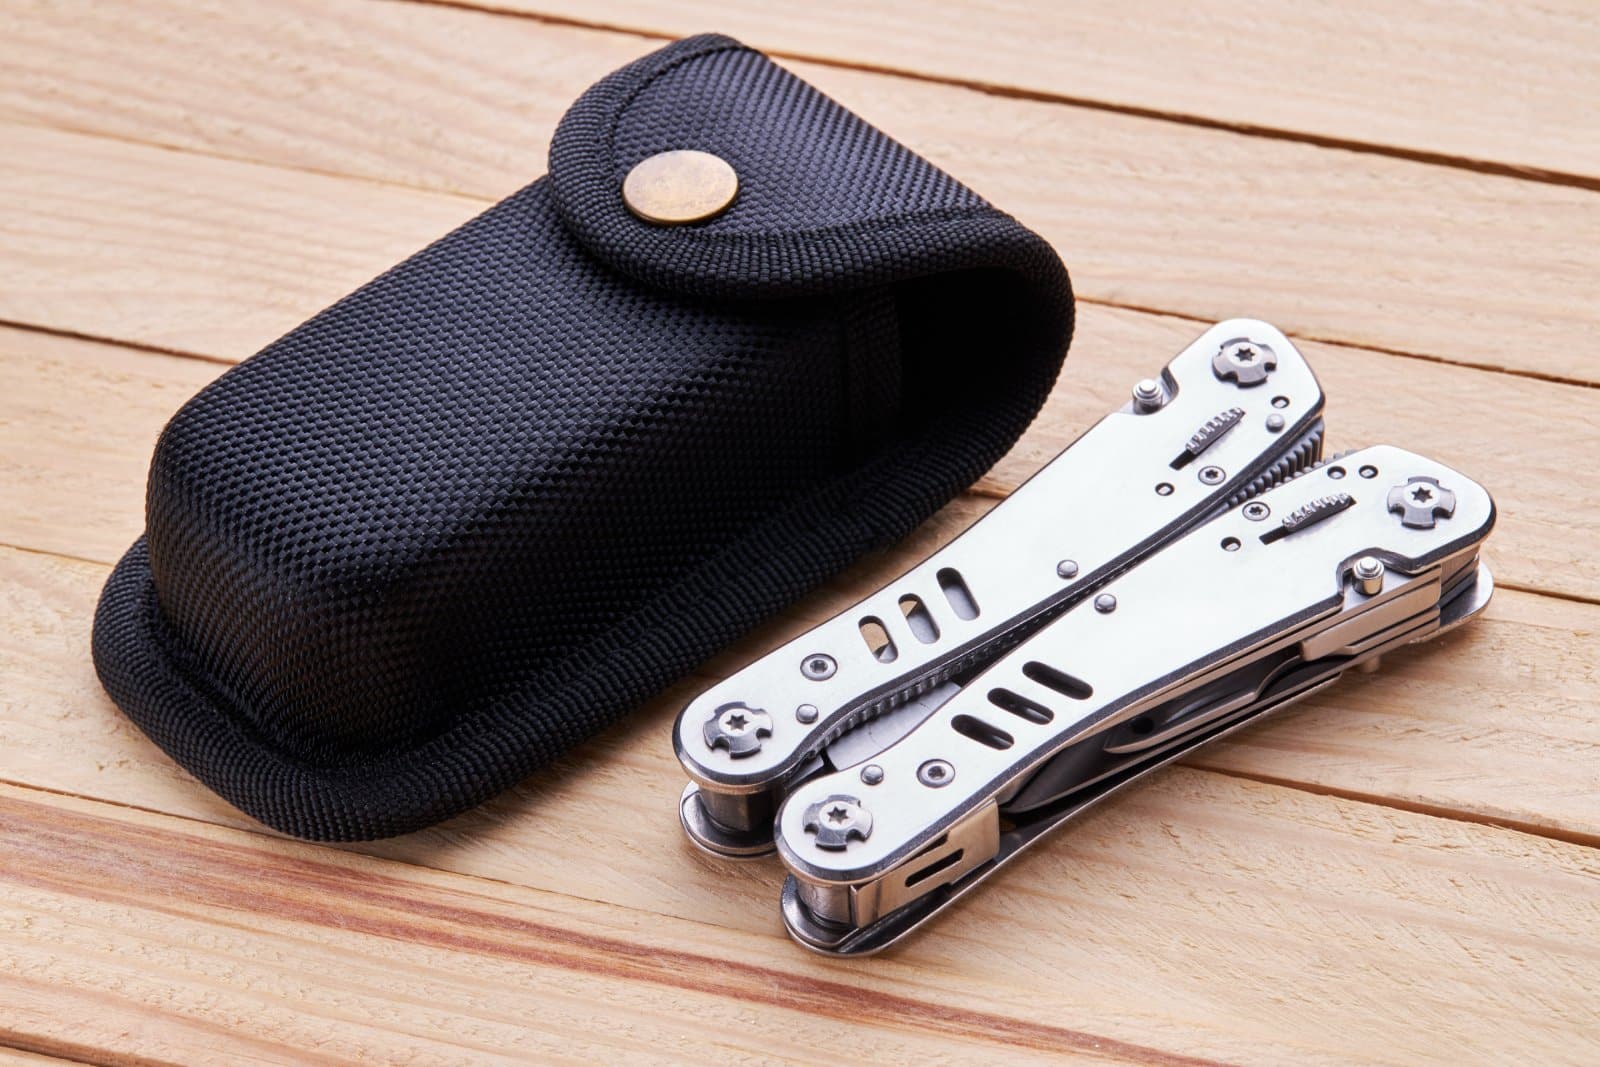 <p class="wp-caption-text">Image Credit: Shutterstock / monte_a</p>  <p>Pack a multi-tool that includes scissors, which can be handy for opening packages or cutting tags. Make sure it’s checked luggage safe.</p>